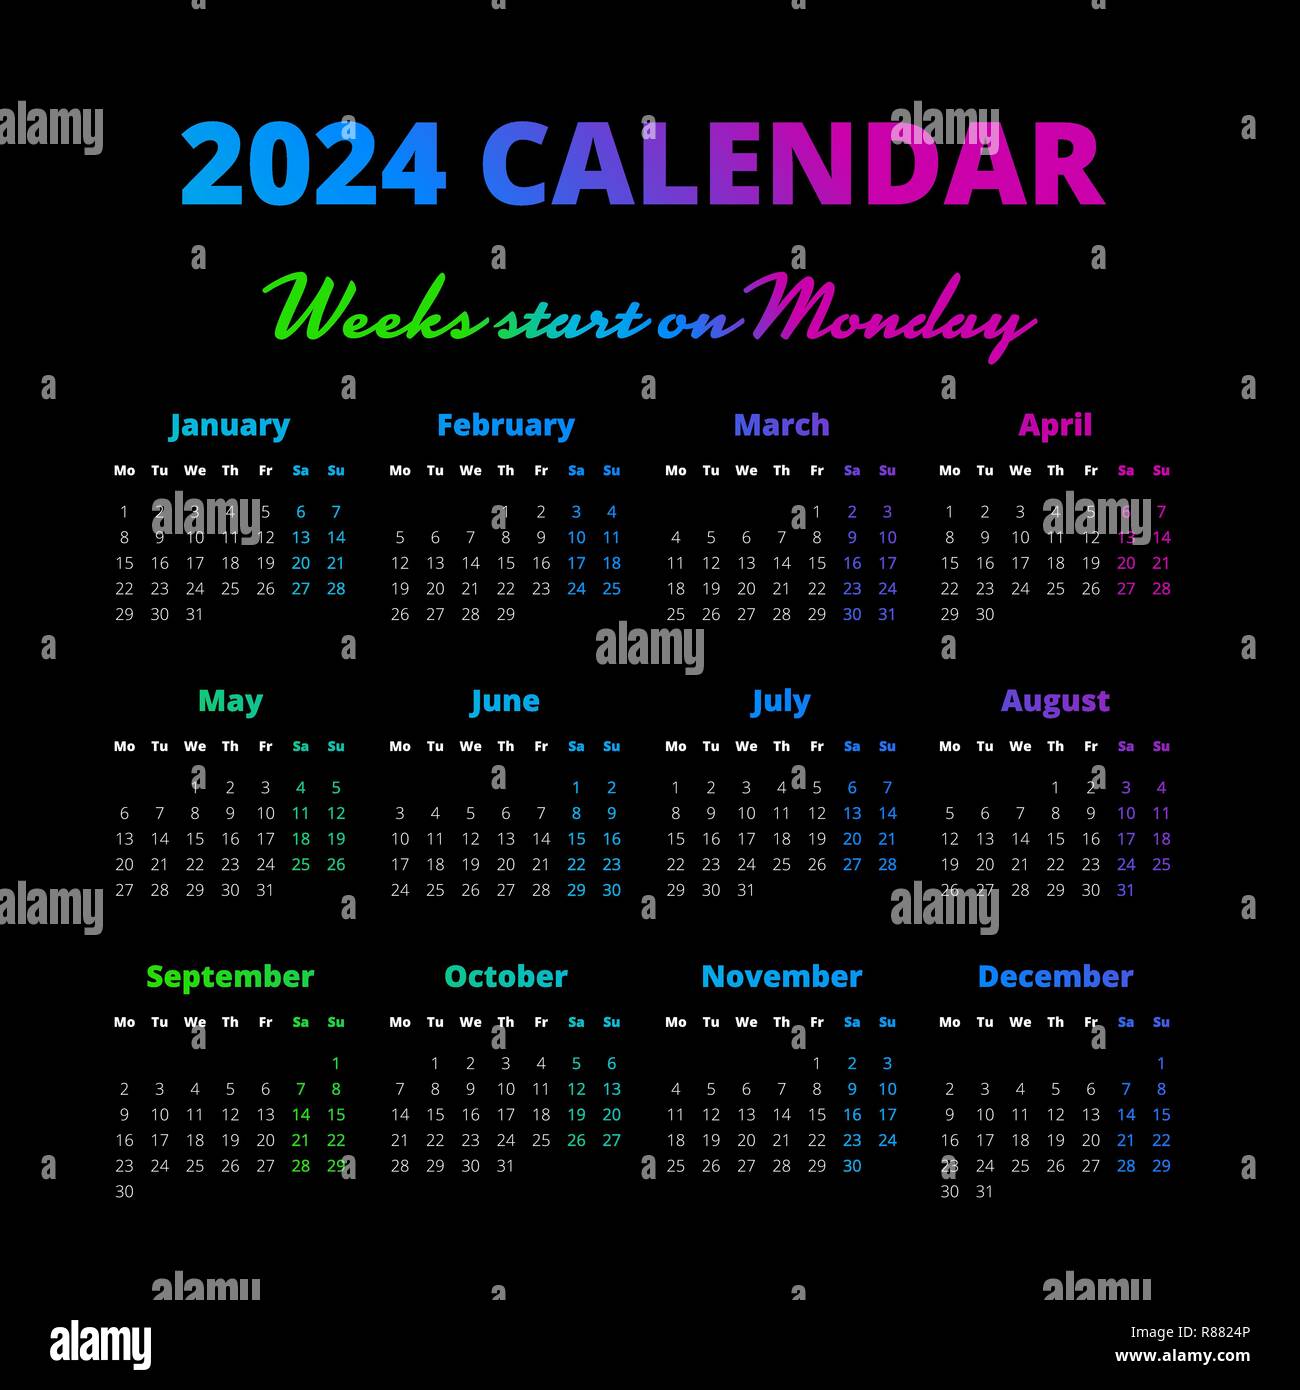 2024 Lunar Calendar Wallpaper For Ios And Android Phone Ally AnnMarie